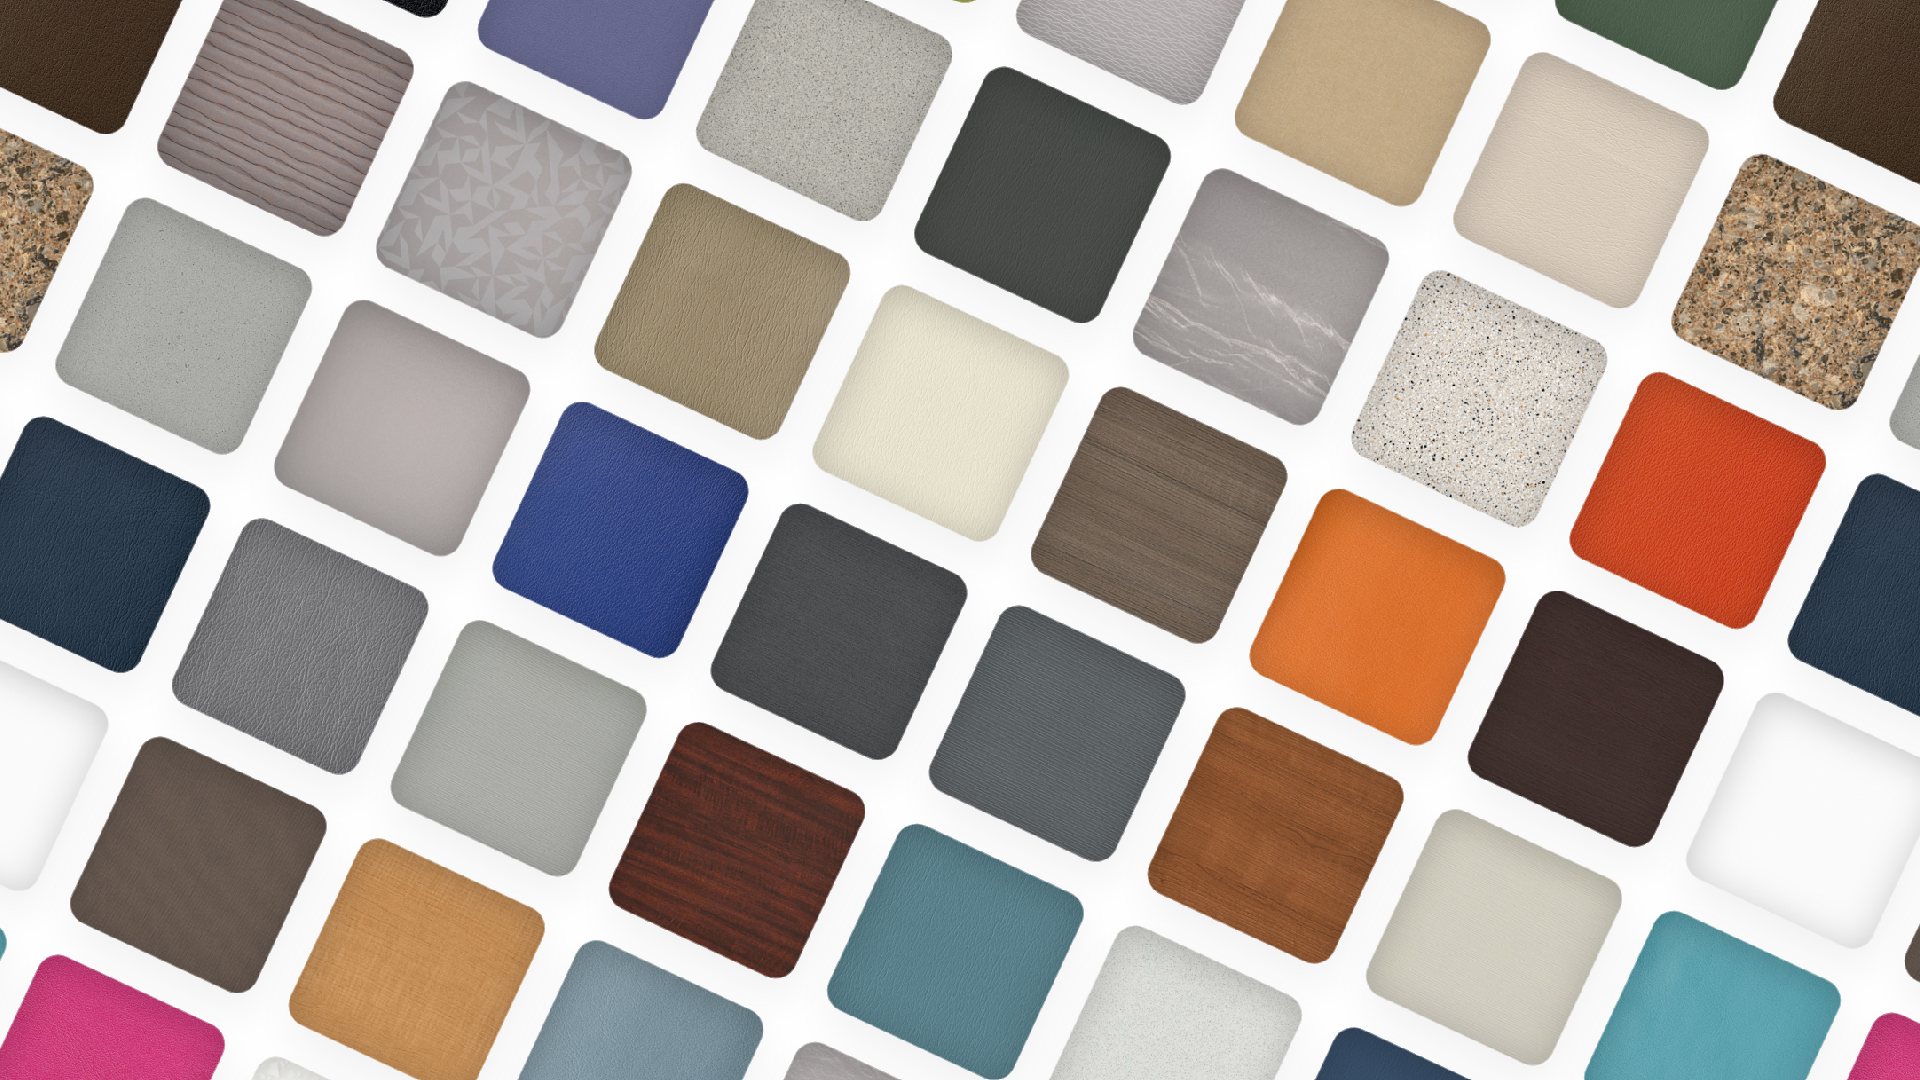 Color sample swatches for dental chair upholstery, dental cabinets, and countertops